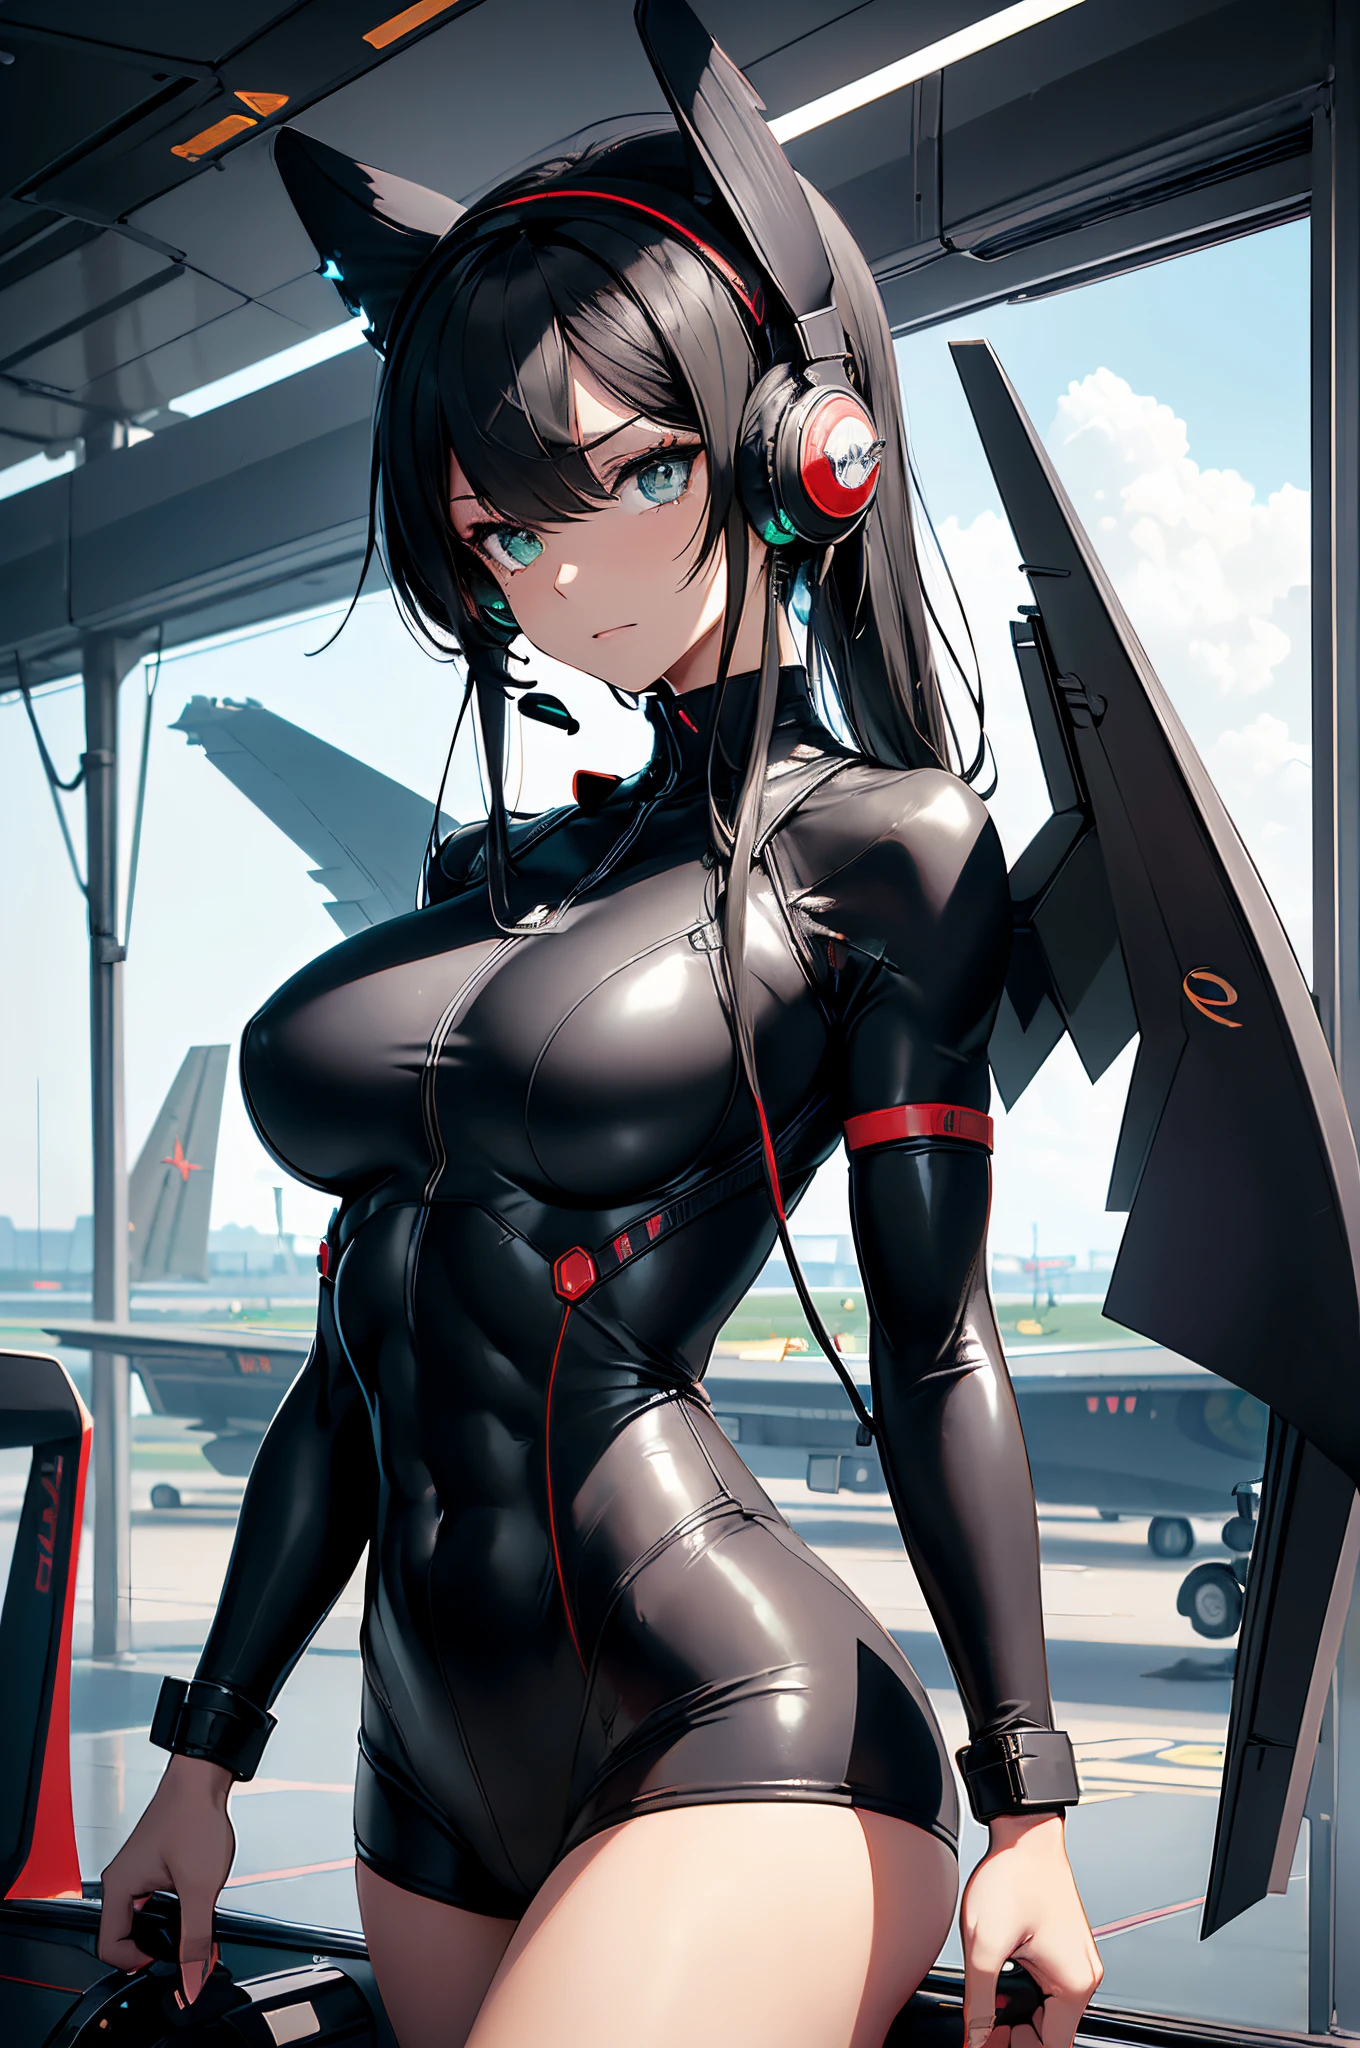 {{{{{masterpiece, best quality, official art, 8k, high resolution illustration}}}}}, 1girl, cute, 2d, japanese, hand drawn, anime style, girl in a smooth curve, matte black bodysuit inspired by a futuristic stealth bomber, (plane tail-ear headphones:1.6), The United States Air Force logo on outfit, standing on a runway military airport, gaze angled 30 degrees to the side, (fighter plane wings:1.6), black hair, (green matric eyes:1.2), dark sclera, cross pulpils, glowing eyes, dark uniform, thick thighs, serious, long legs, adult, detail wings, (muscular girl:1.5), black uniform, muscular arms, triceps, biceps, (8-pack abs:1.3), (deadly:1.2), (horrible:1.2), (piercing gaze:1.2), machine of death, emotionless android, the most dangerous weapon of the world, cyborg girl, strong girl, overwhelming presence, warlord, humamized fighter, red antennas on head, black bodysuit, covered skin